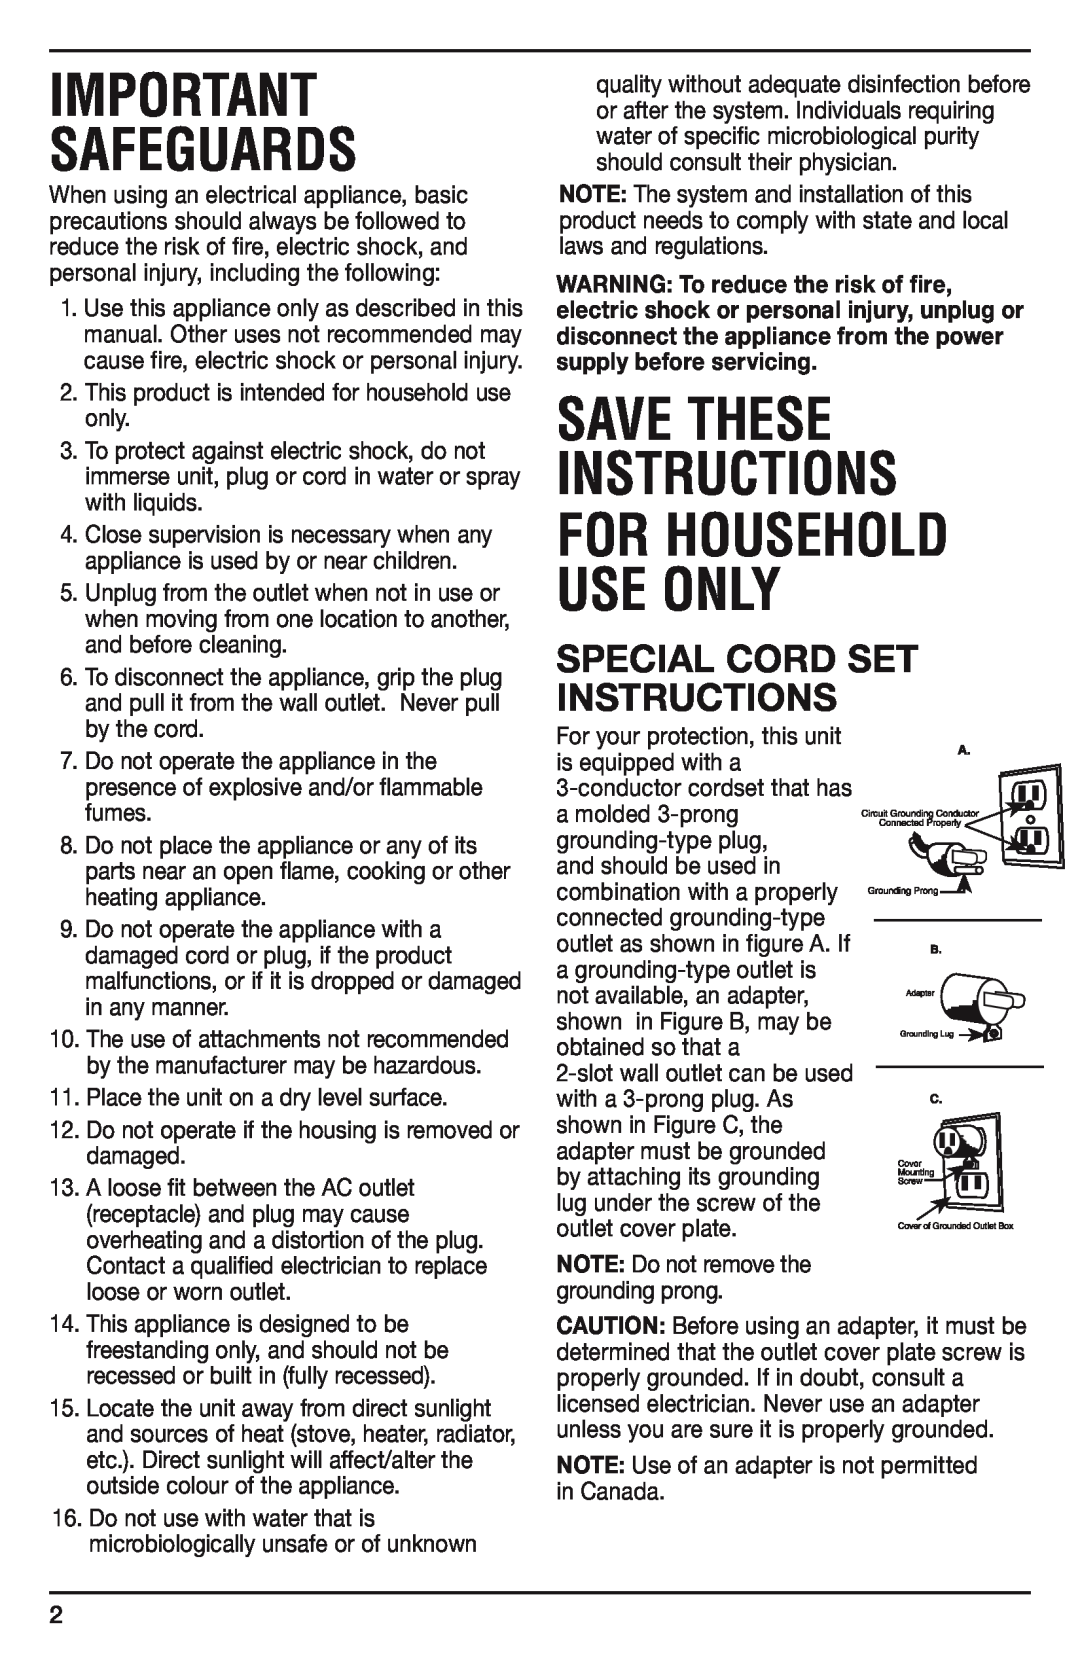 Cuisinart WCH-950C manual Special Cord Set Instructions, Safeguards, Save These Instructions For Household Use Only 